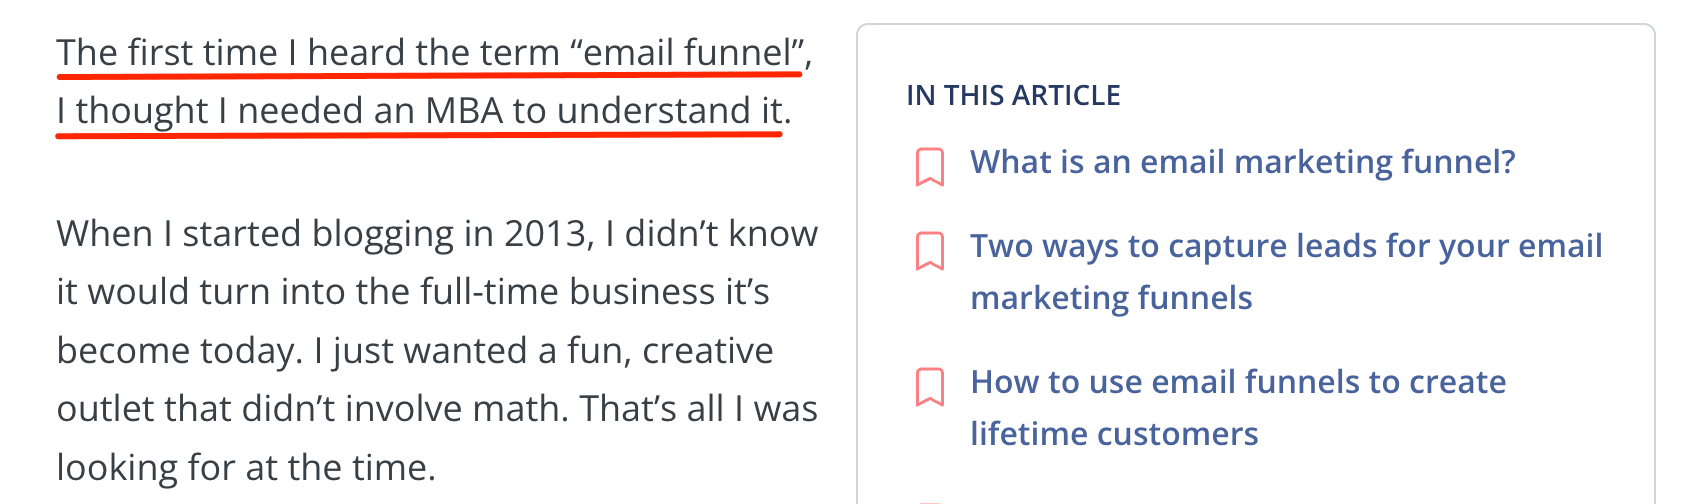 Screenshot of text from an article by ConvertKit